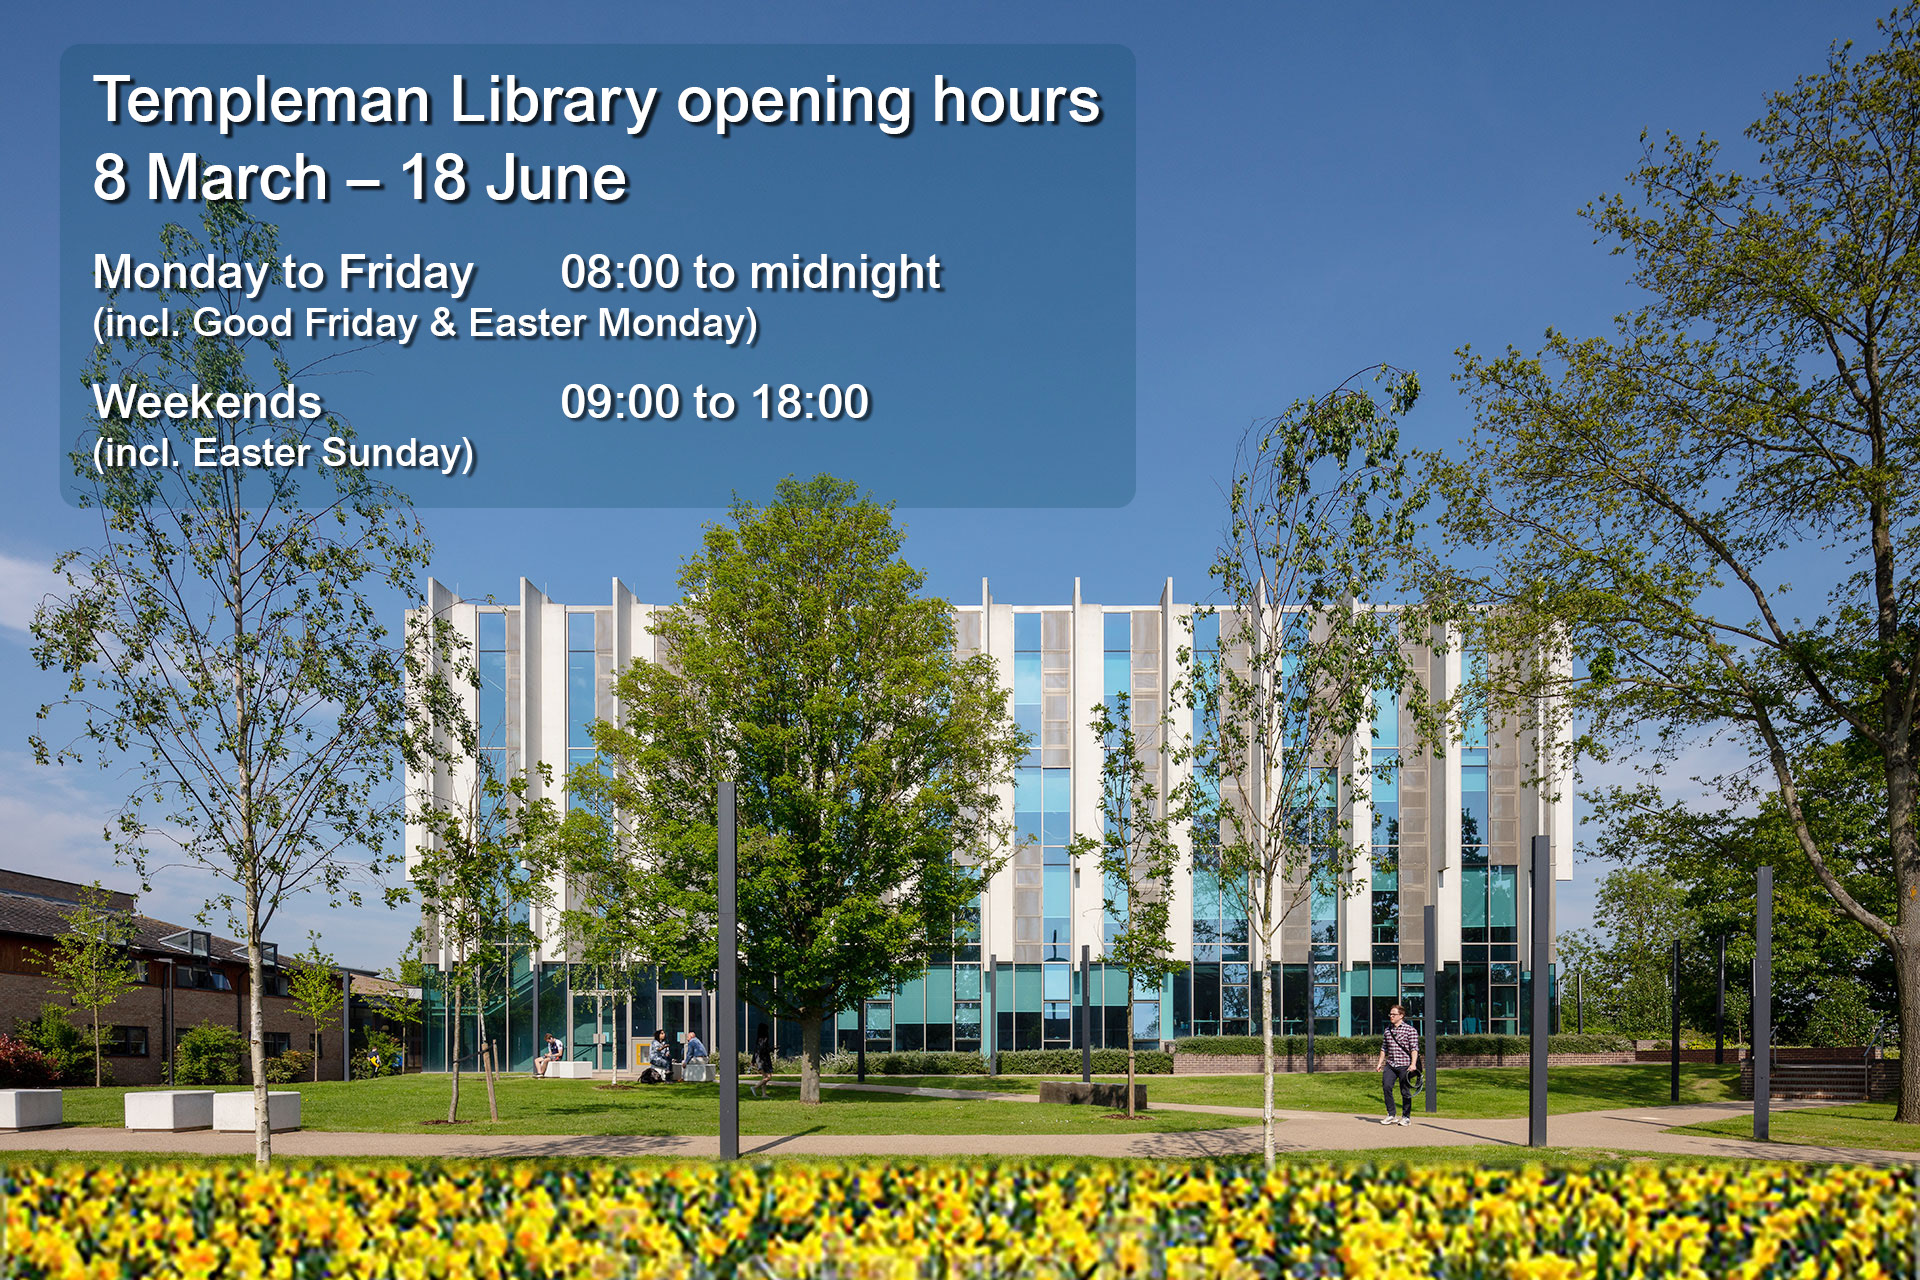 Library opening hours